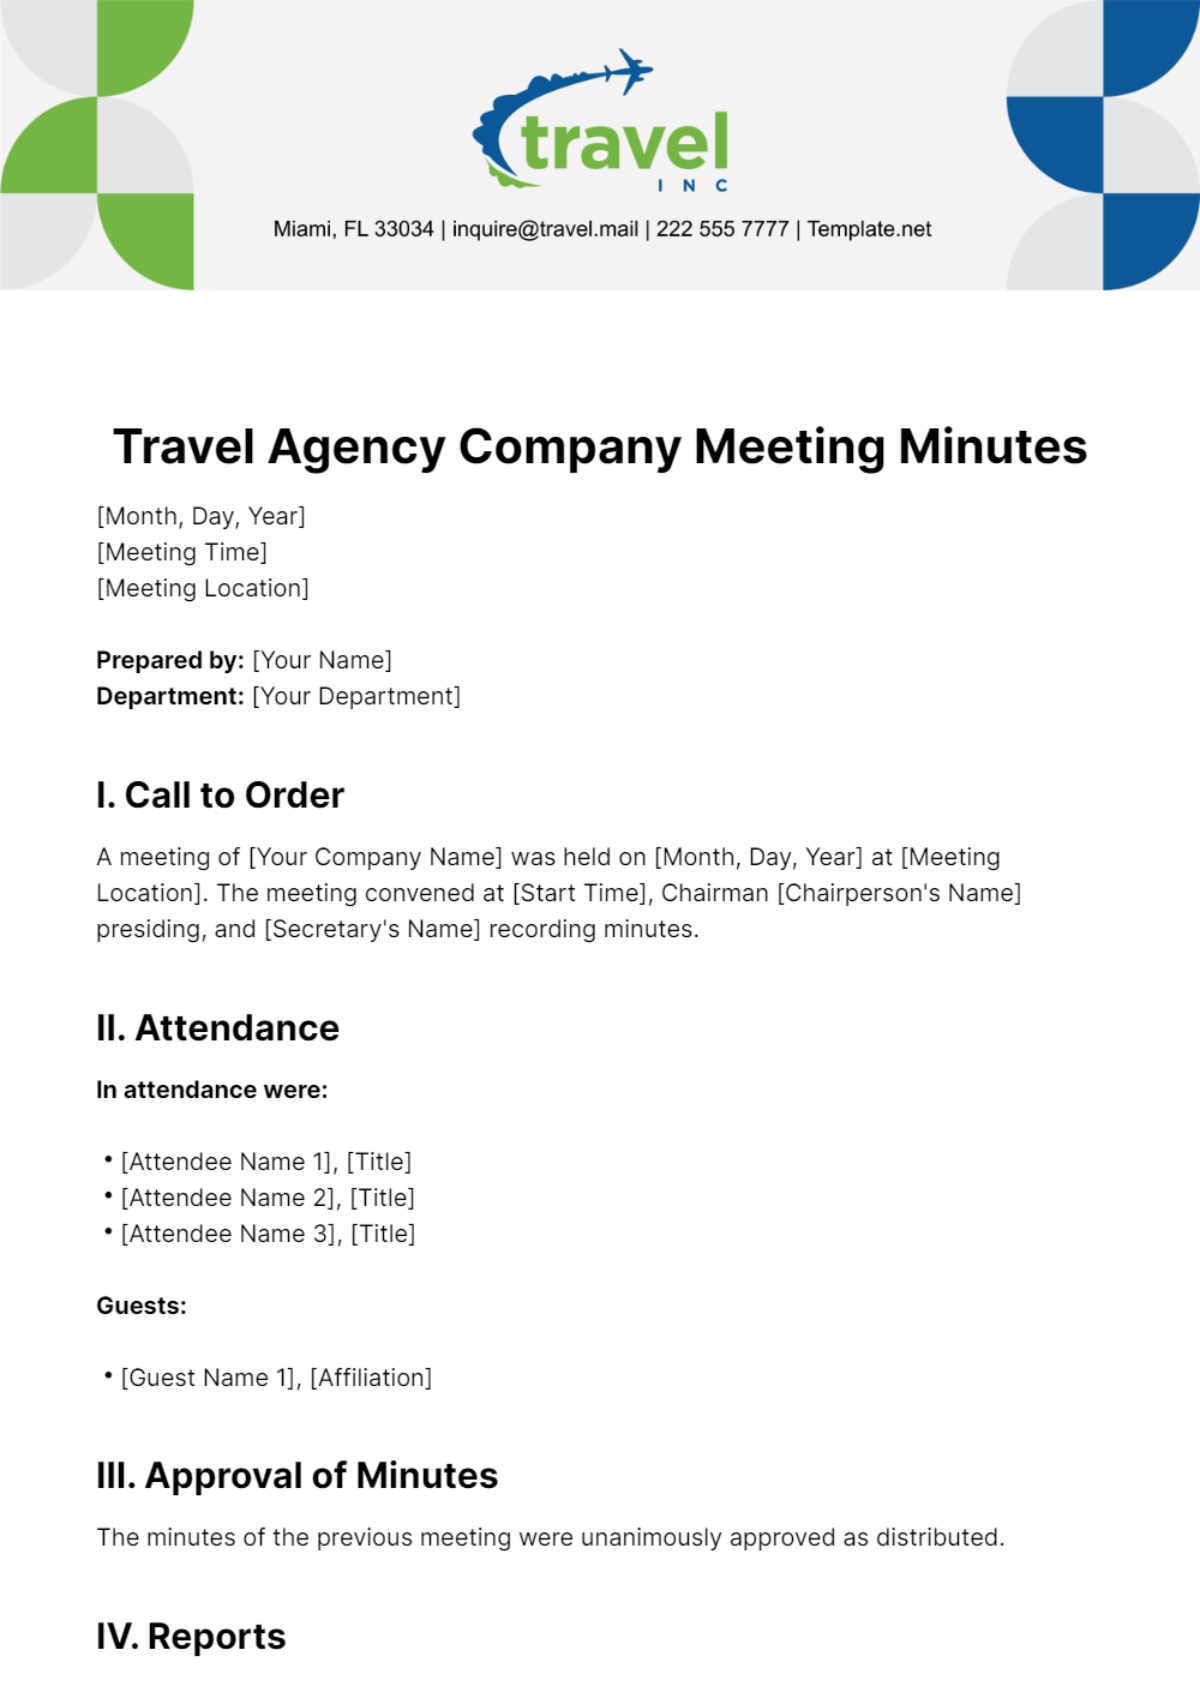 Free Travel Agency Company Meeting Minutes Template